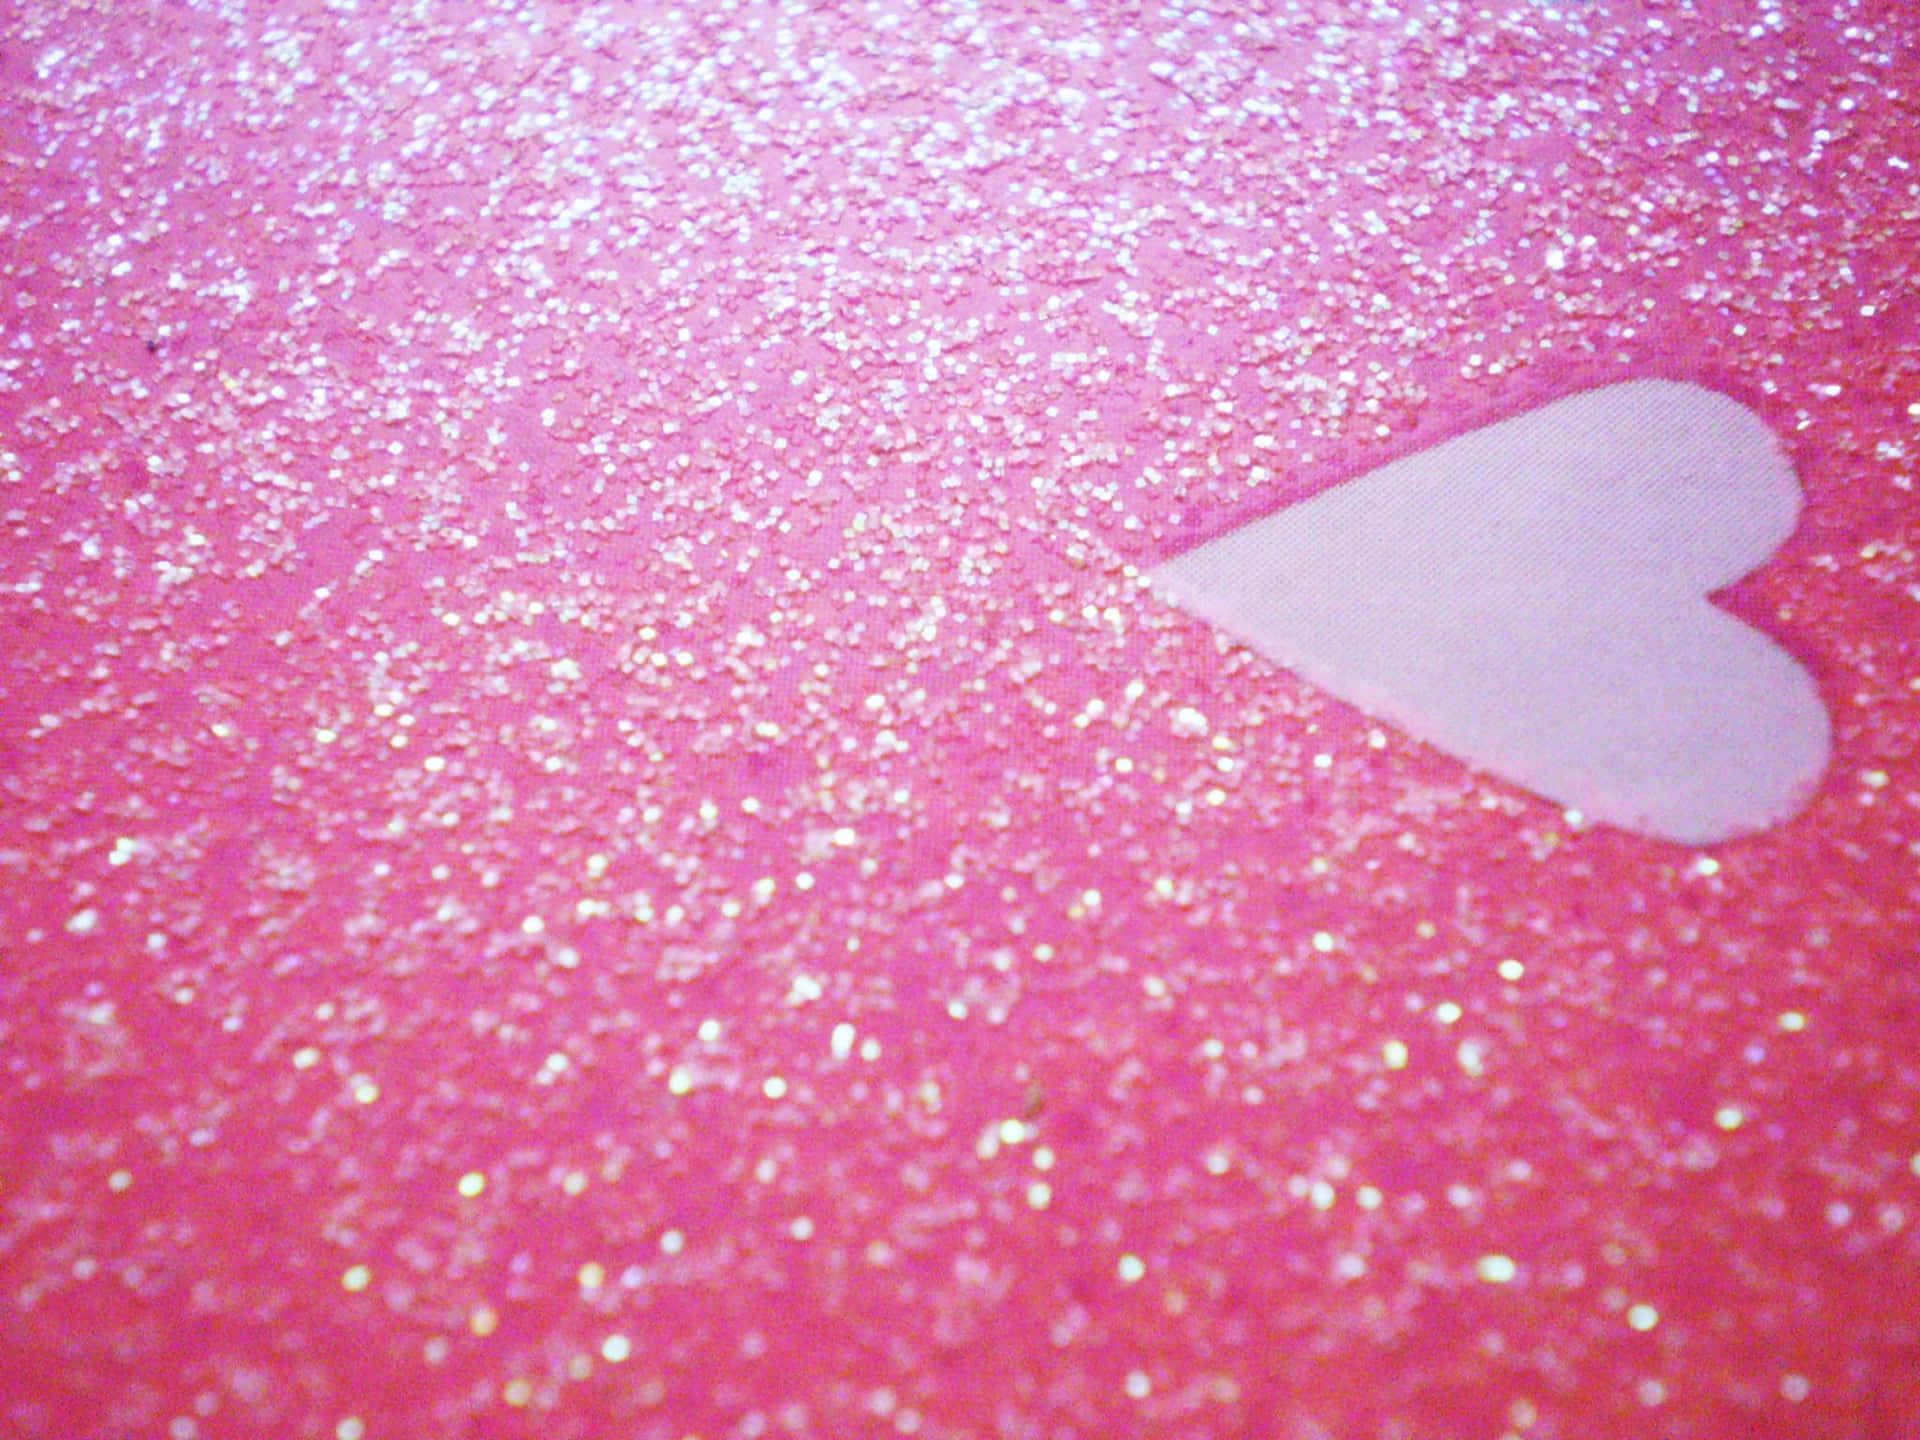 A Glittery Pink Heart Awakens Joy and Sparkles with Delight Wallpaper